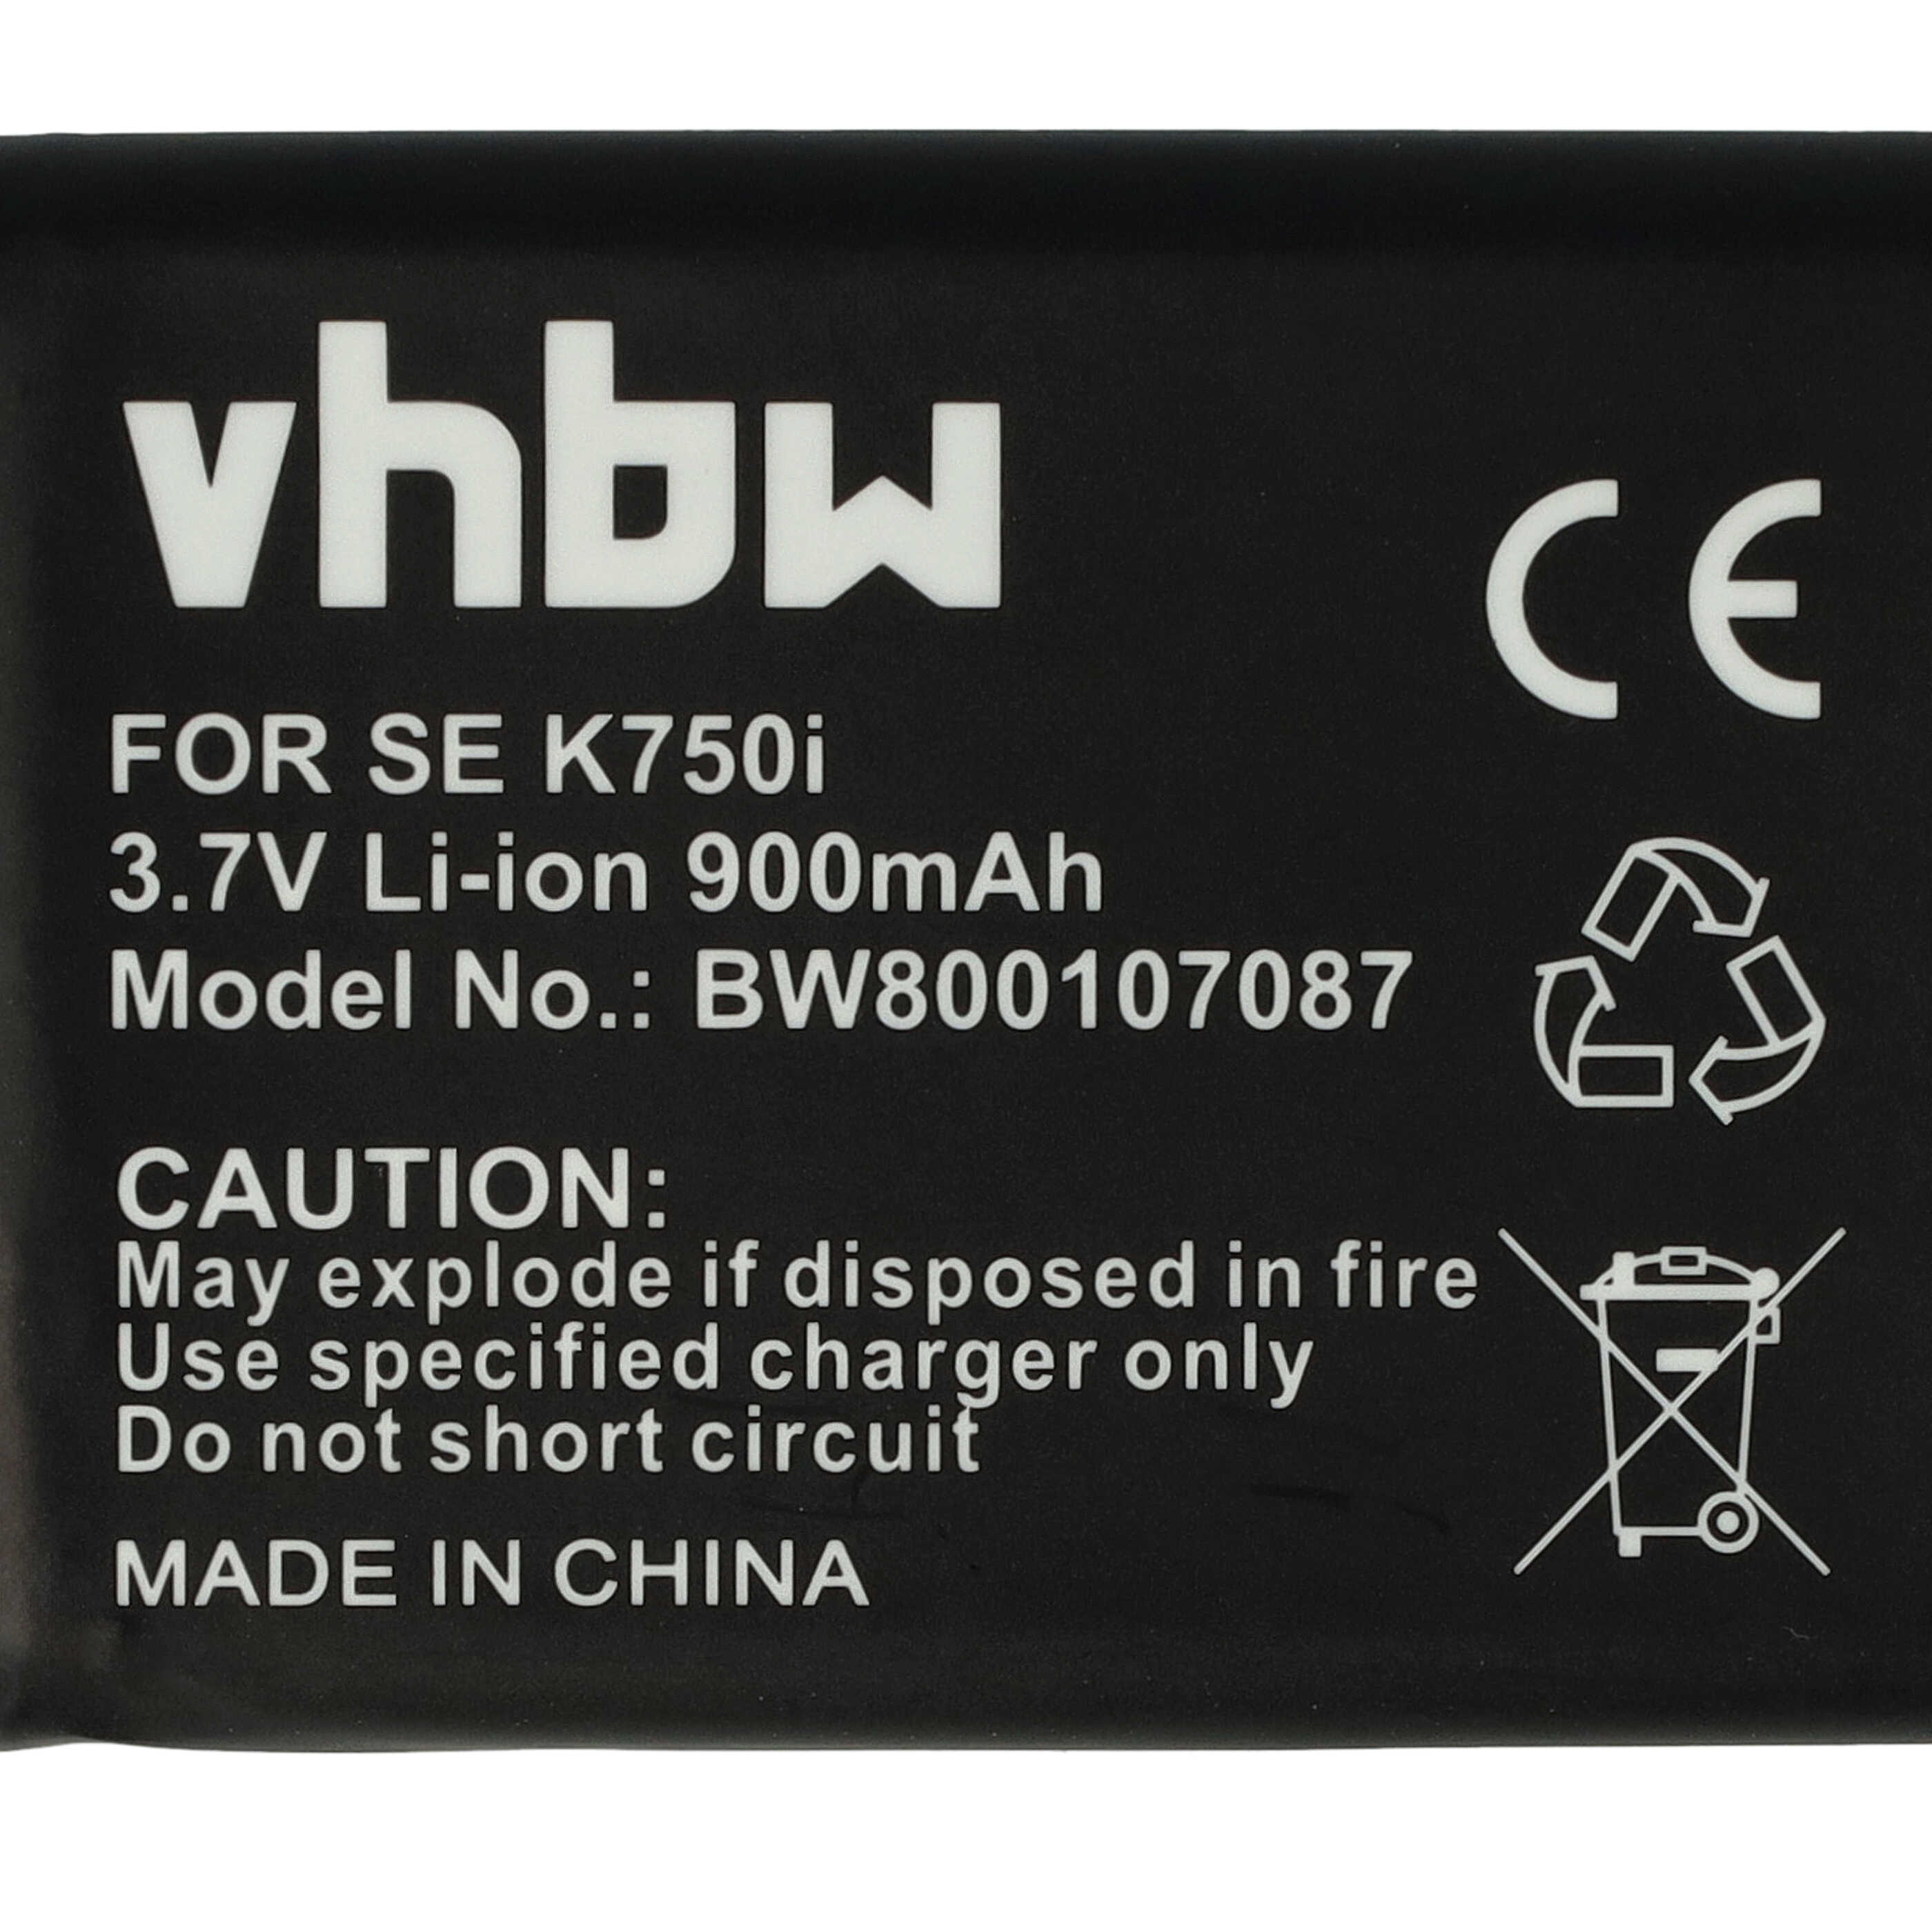 Mobile Phone Battery Replacement for Sony-Ericsson BST-37 - 900mAh 3.7V Li-Ion